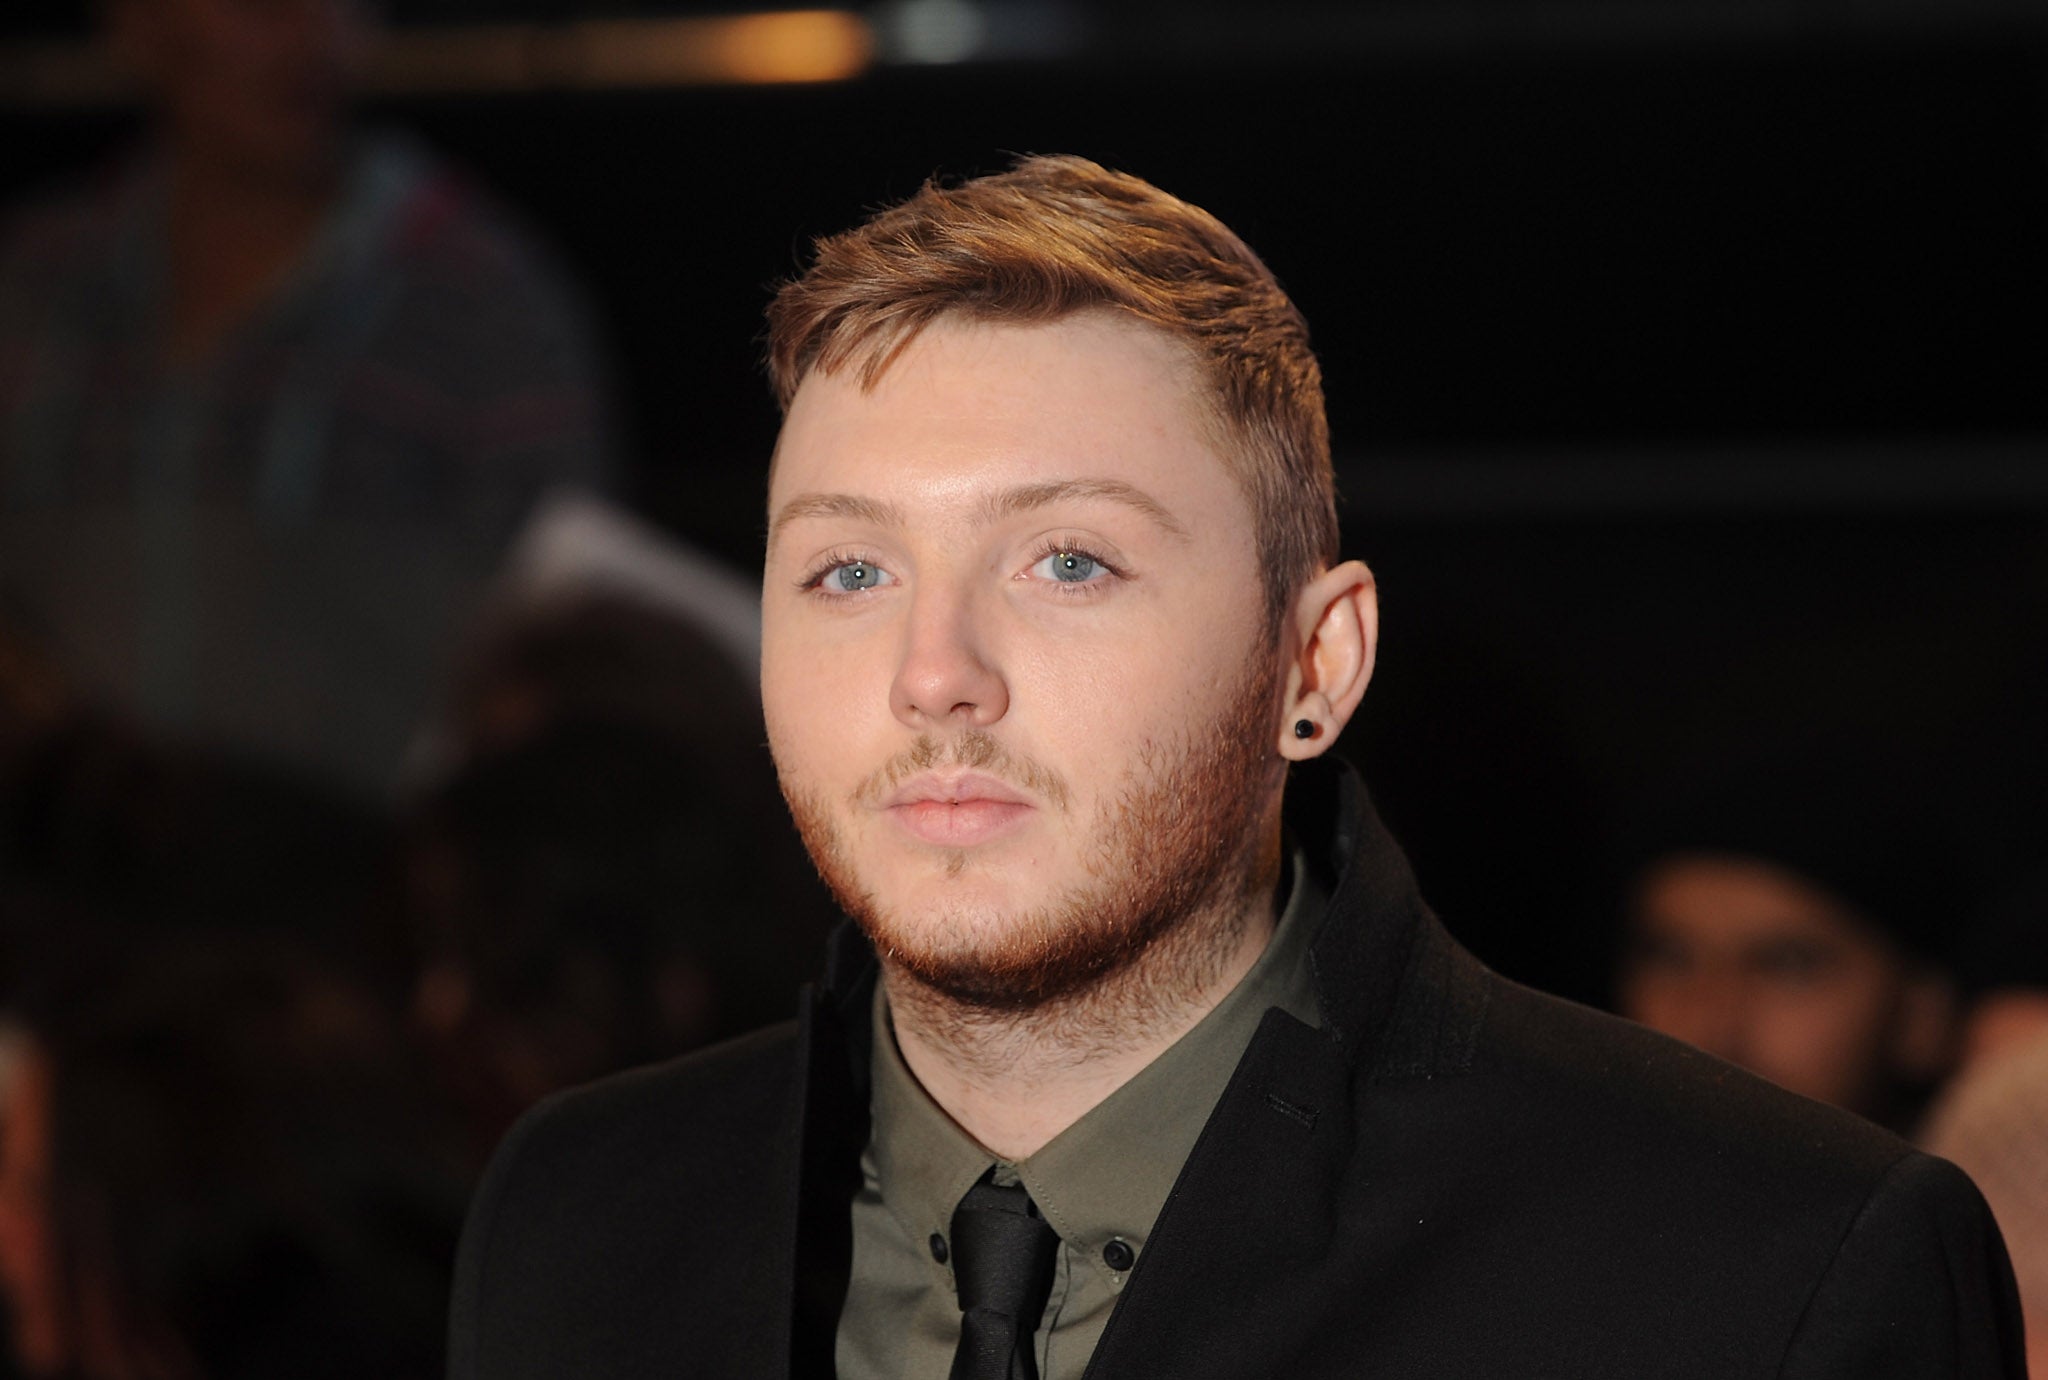 James Arthur also claims Sam Smith and Ed Sheeran had 'more support' than they make out